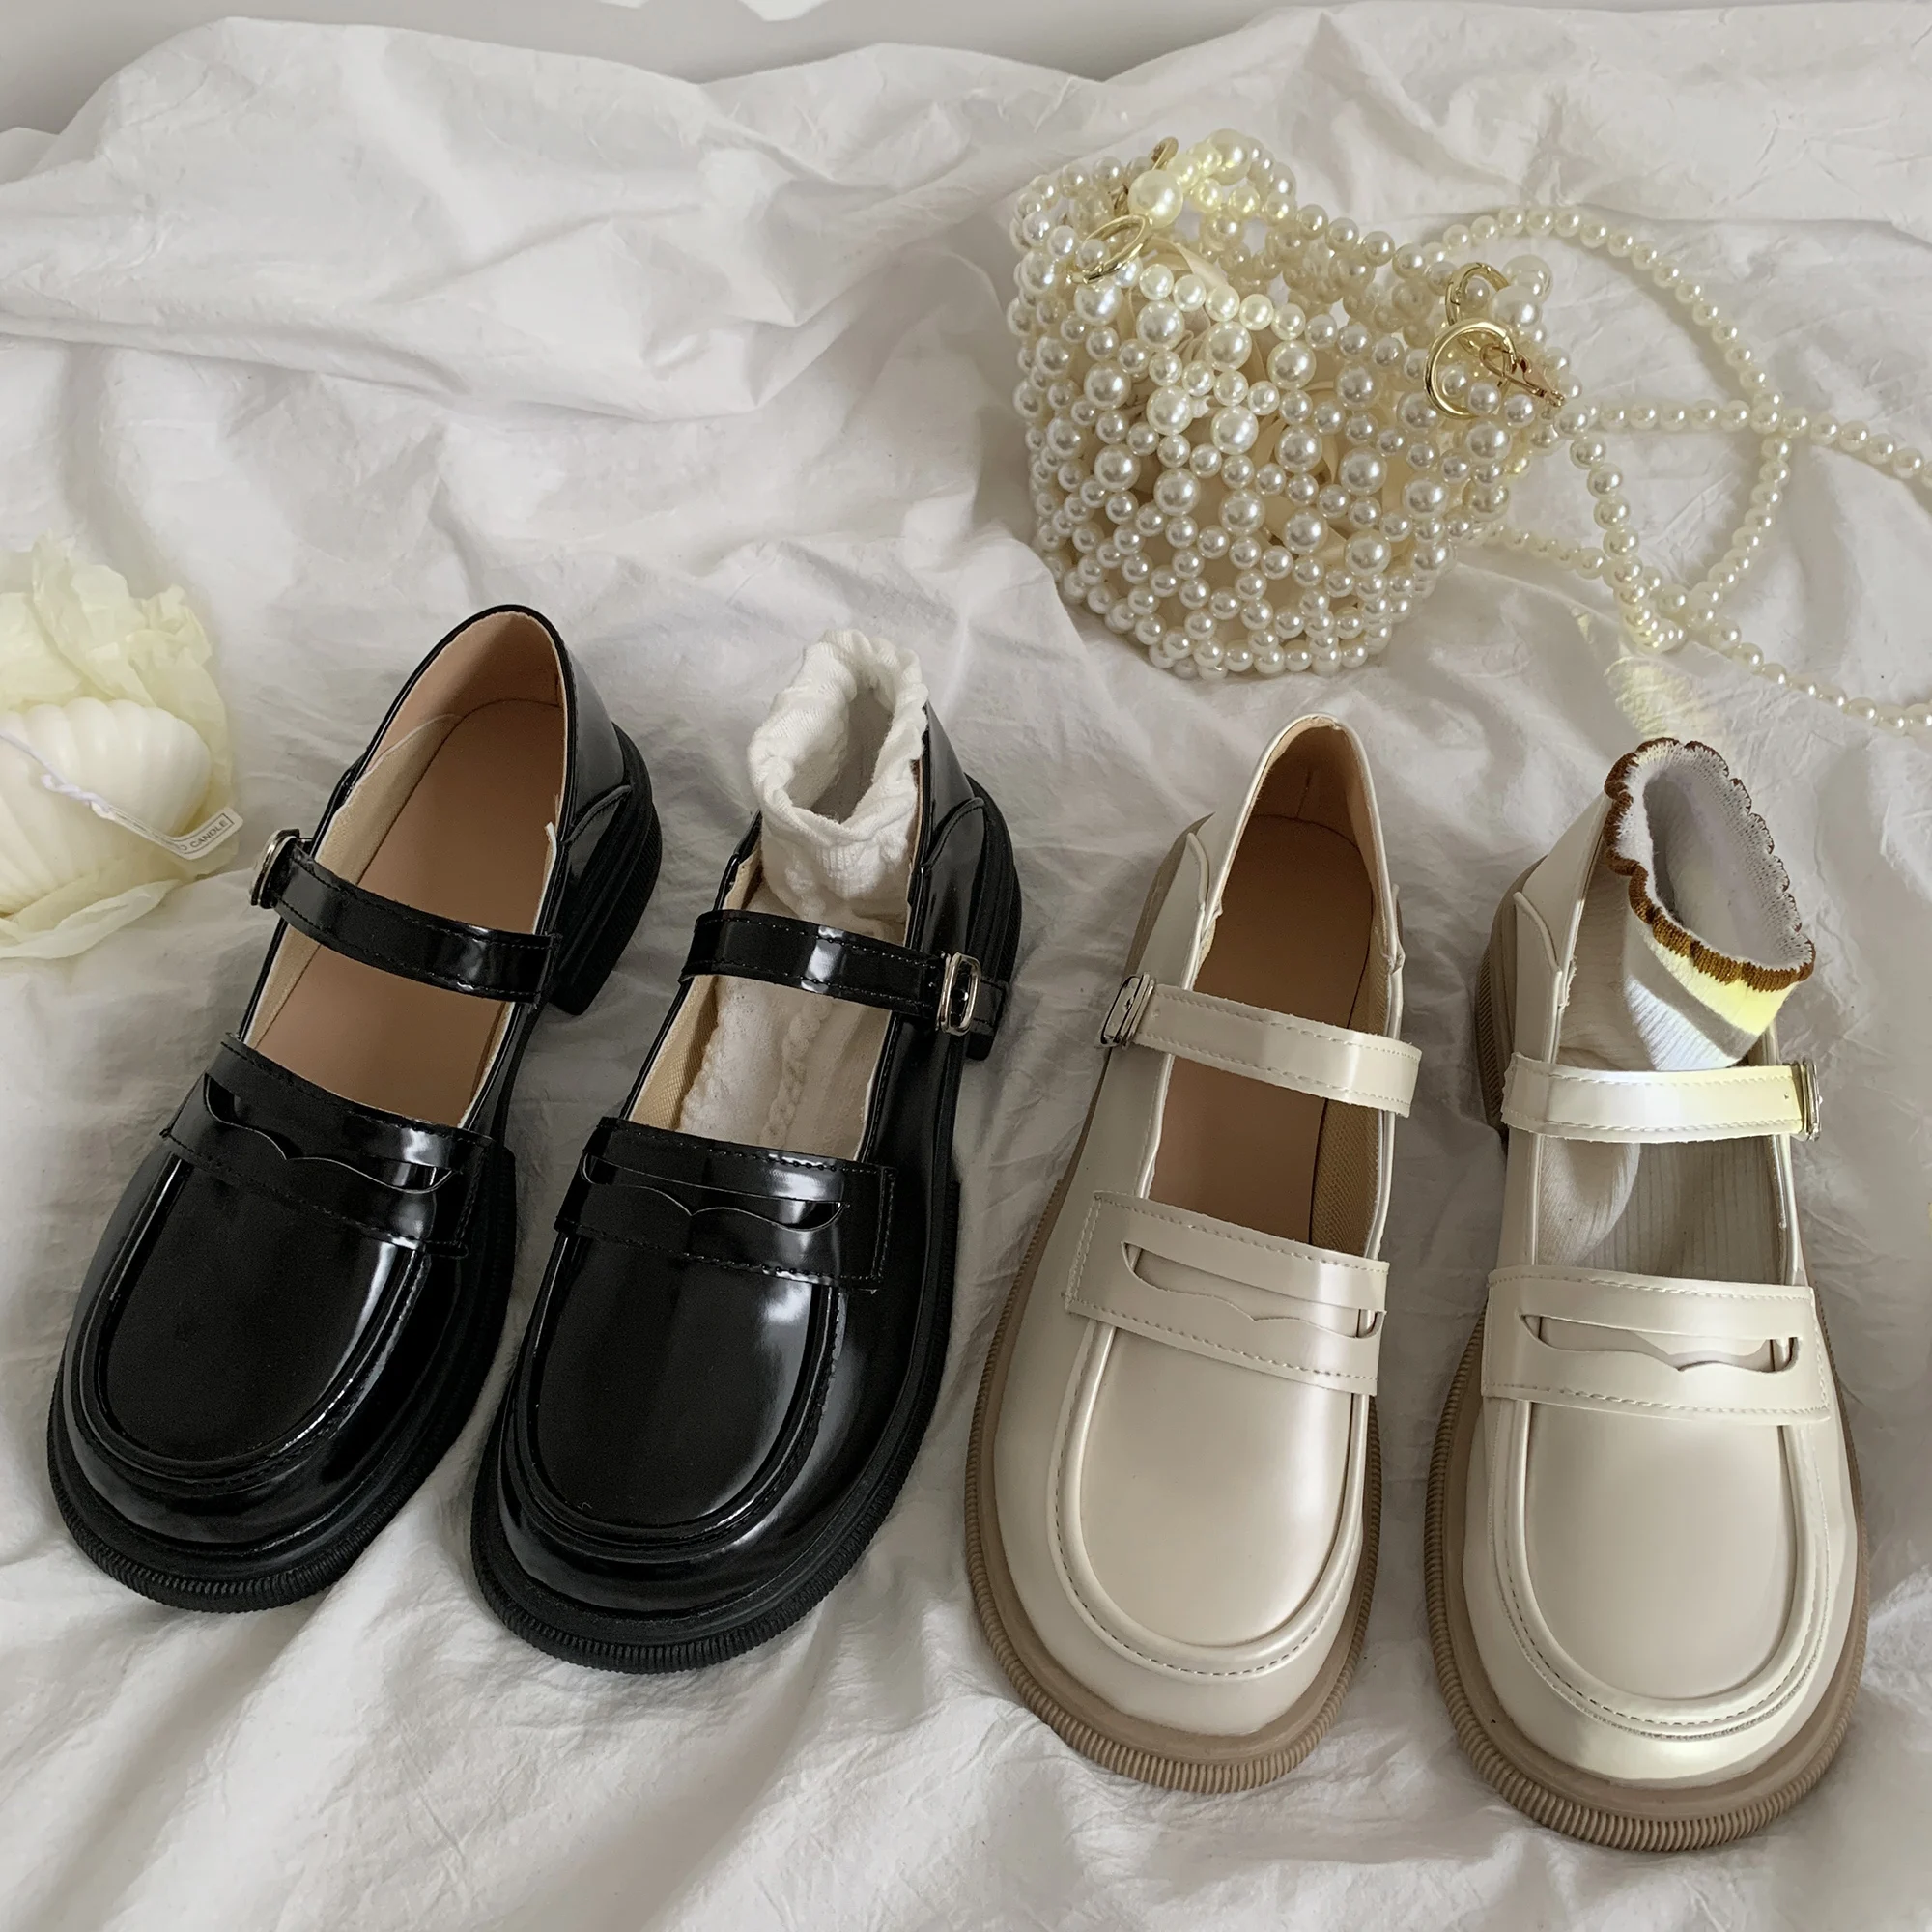 

All-Match Shoes Woman Flats Modis British Style Oxfords Dress Retro Summer 2022 Preppy New Leather PU Med Rubber Basic Rome Mary